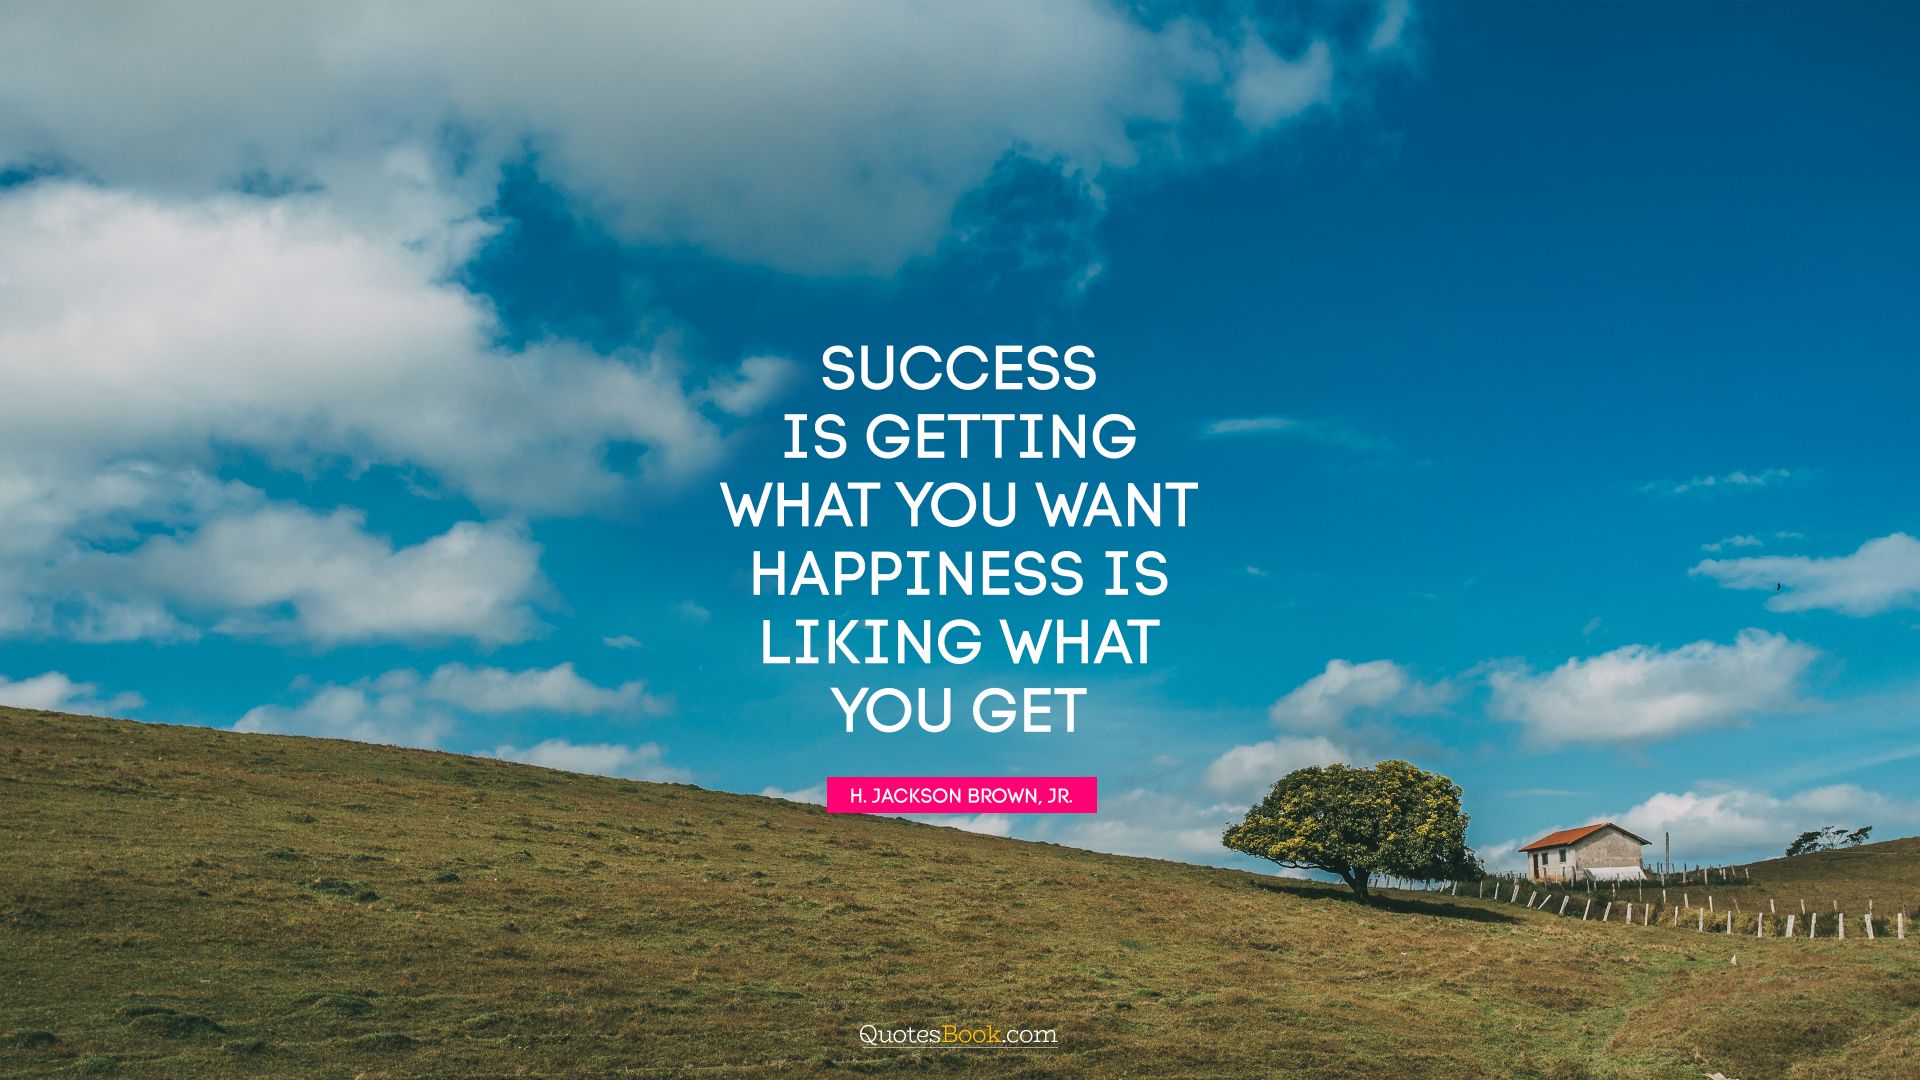 Success is getting what you want. Happiness is liking what you get. - Quote by H. Jackson Brown, Jr.